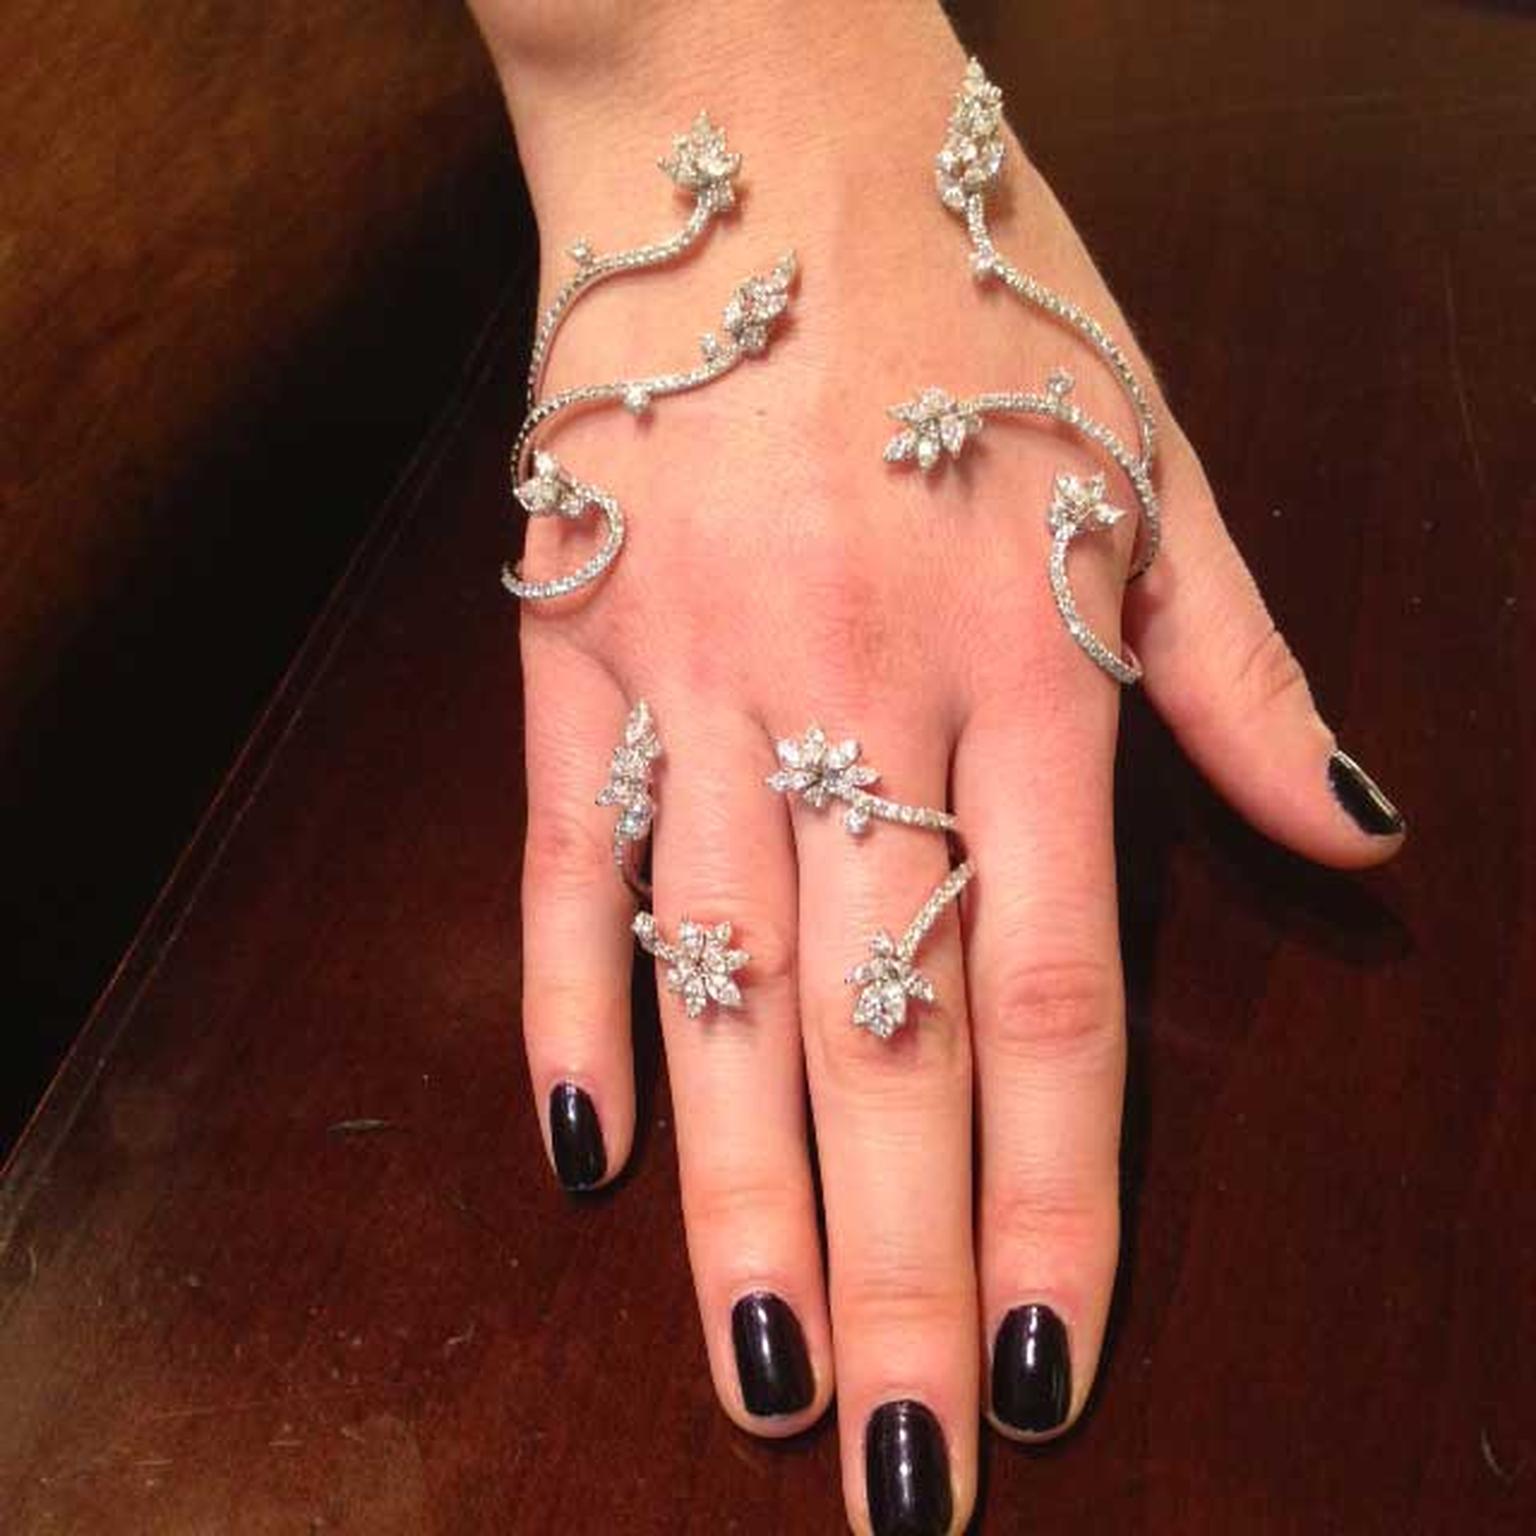 Yeprem will be showing a wide selection of unique hand jewels at the Couture Show Las Vegas. This glamorous flower design wraps around the hand and fingers like wild vines